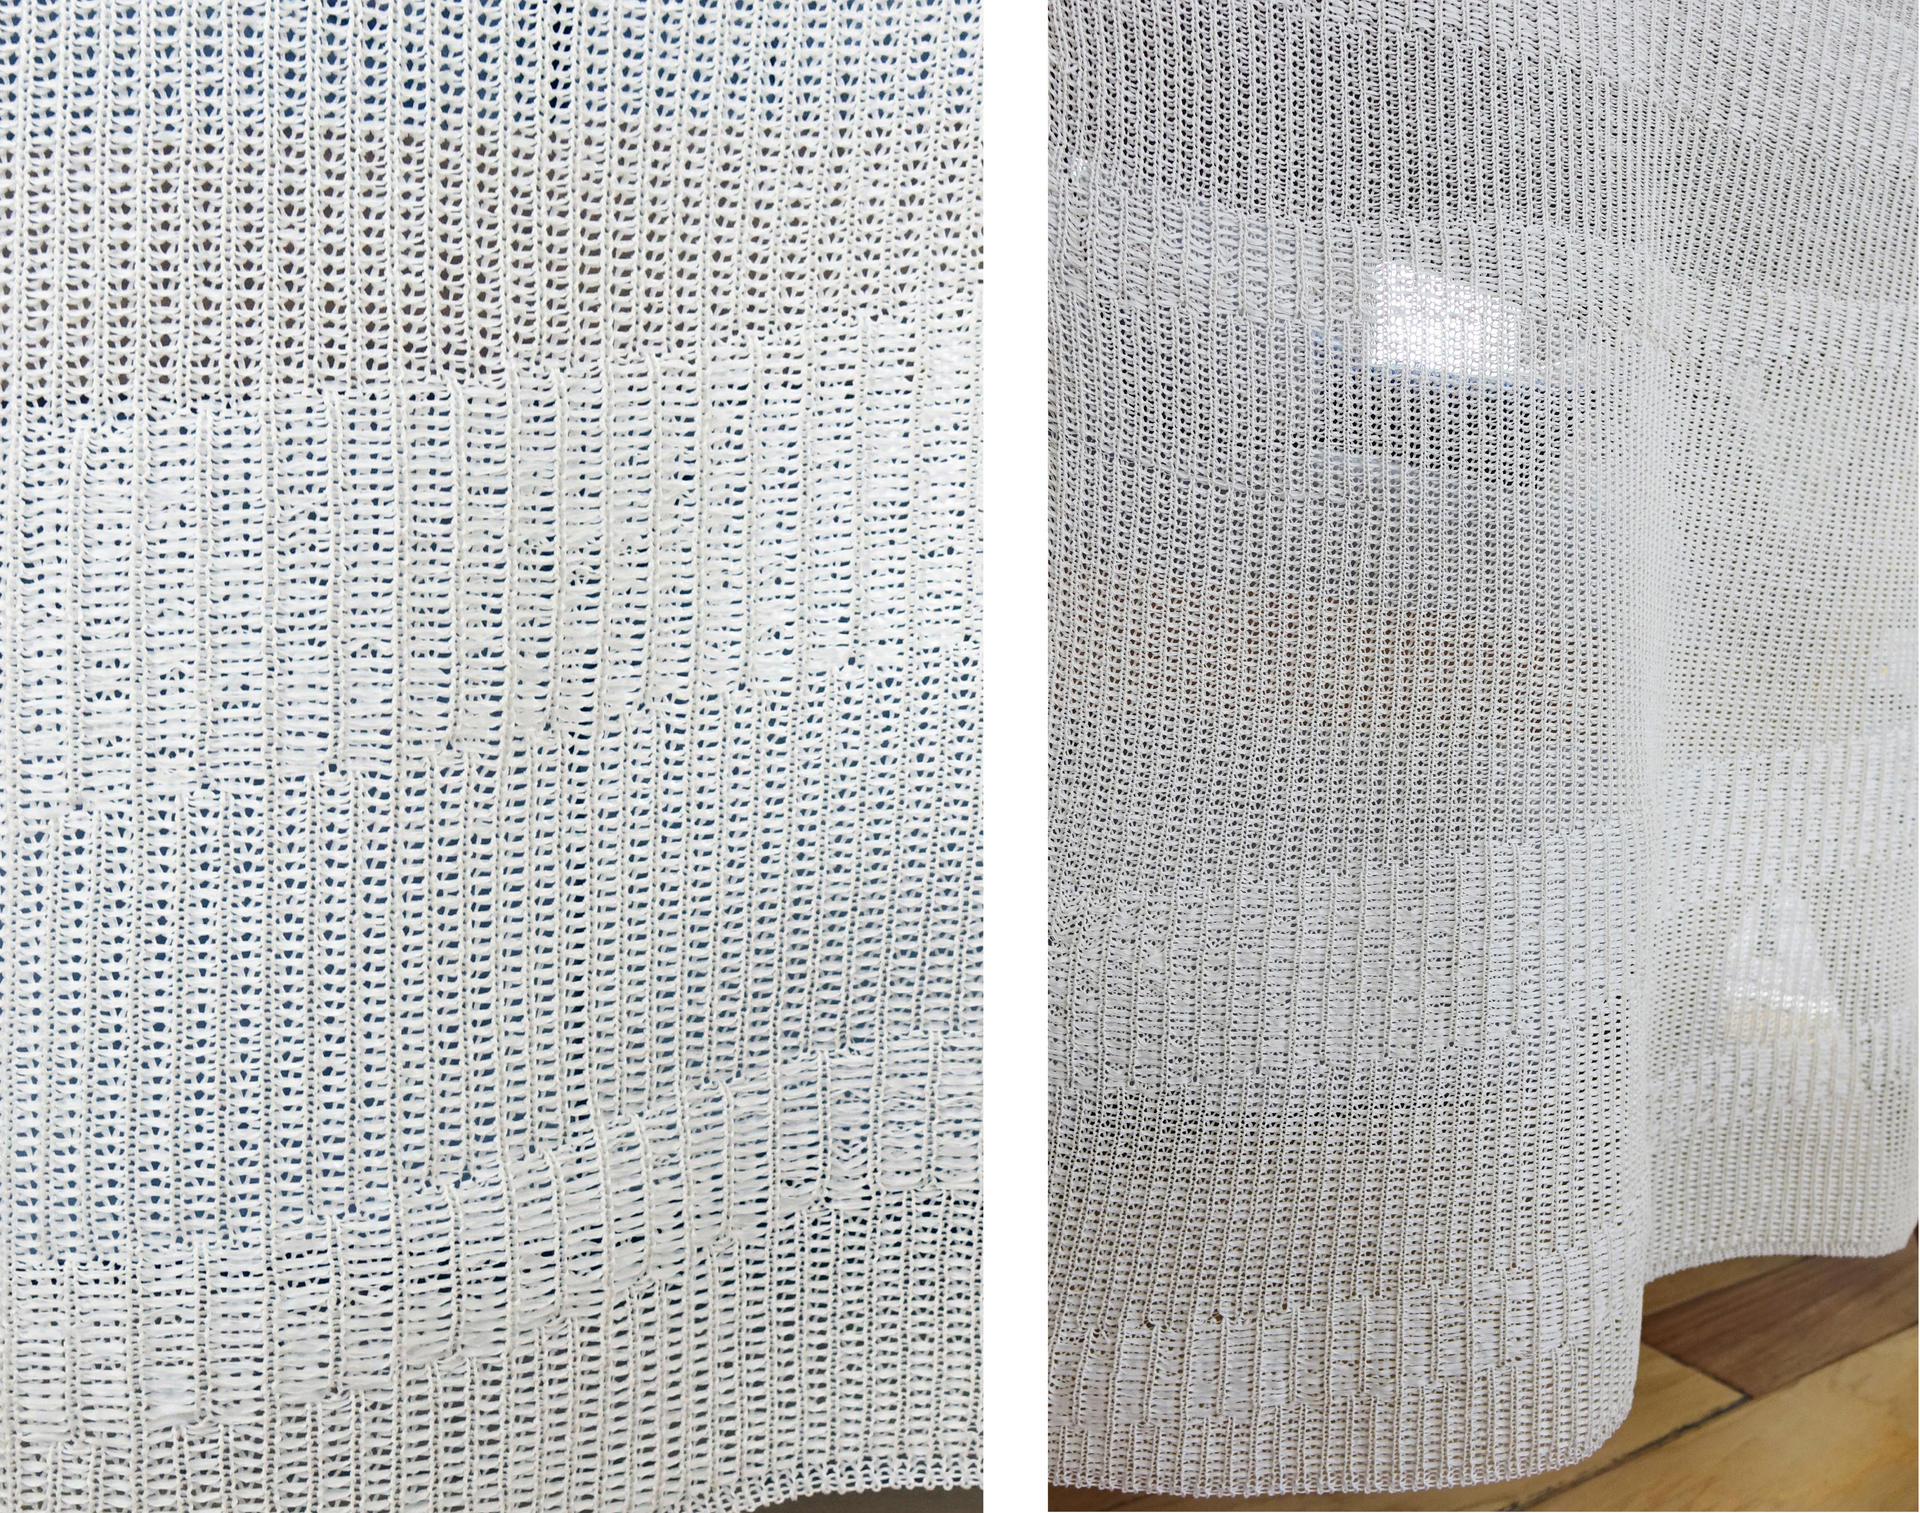 Slightly transparent, white knitted fabric. 